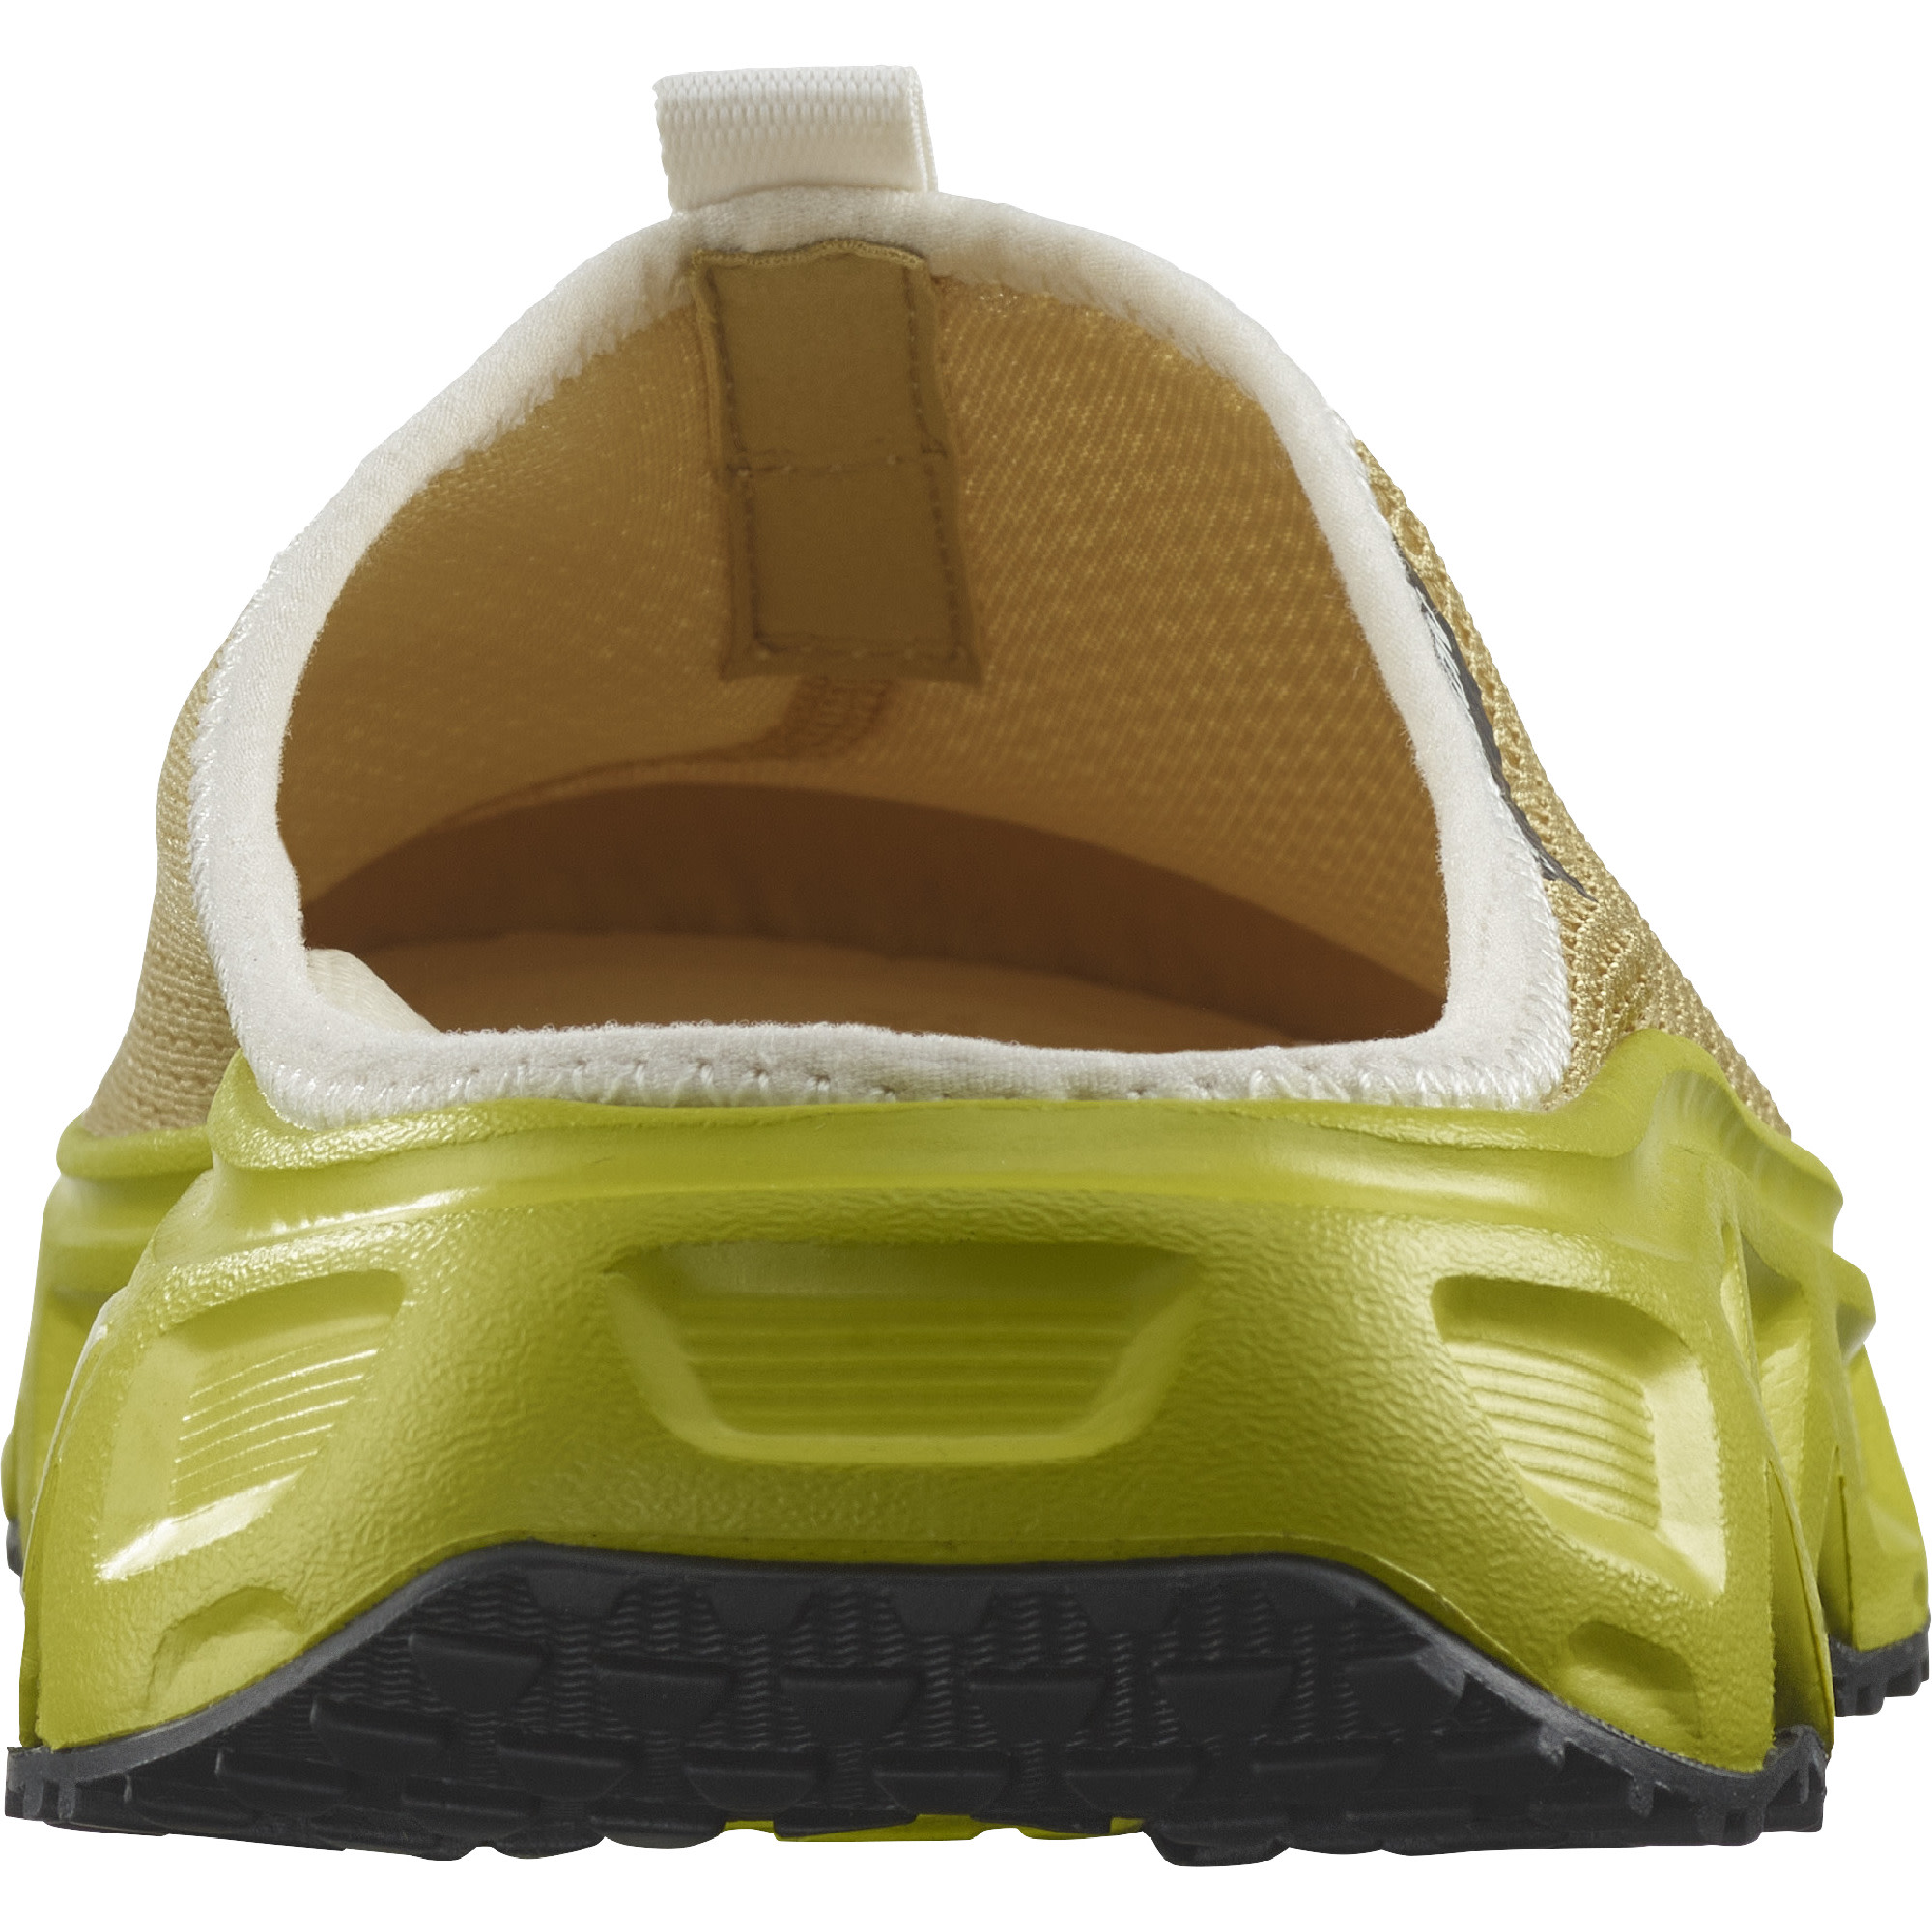 Salomon Reelax Slide 6.0 W - Pearl Blue/White/Bleached Sand - 38 2/3 (UK  5.5) Your specialist in outdoor, wintersports, fieldhockey and more